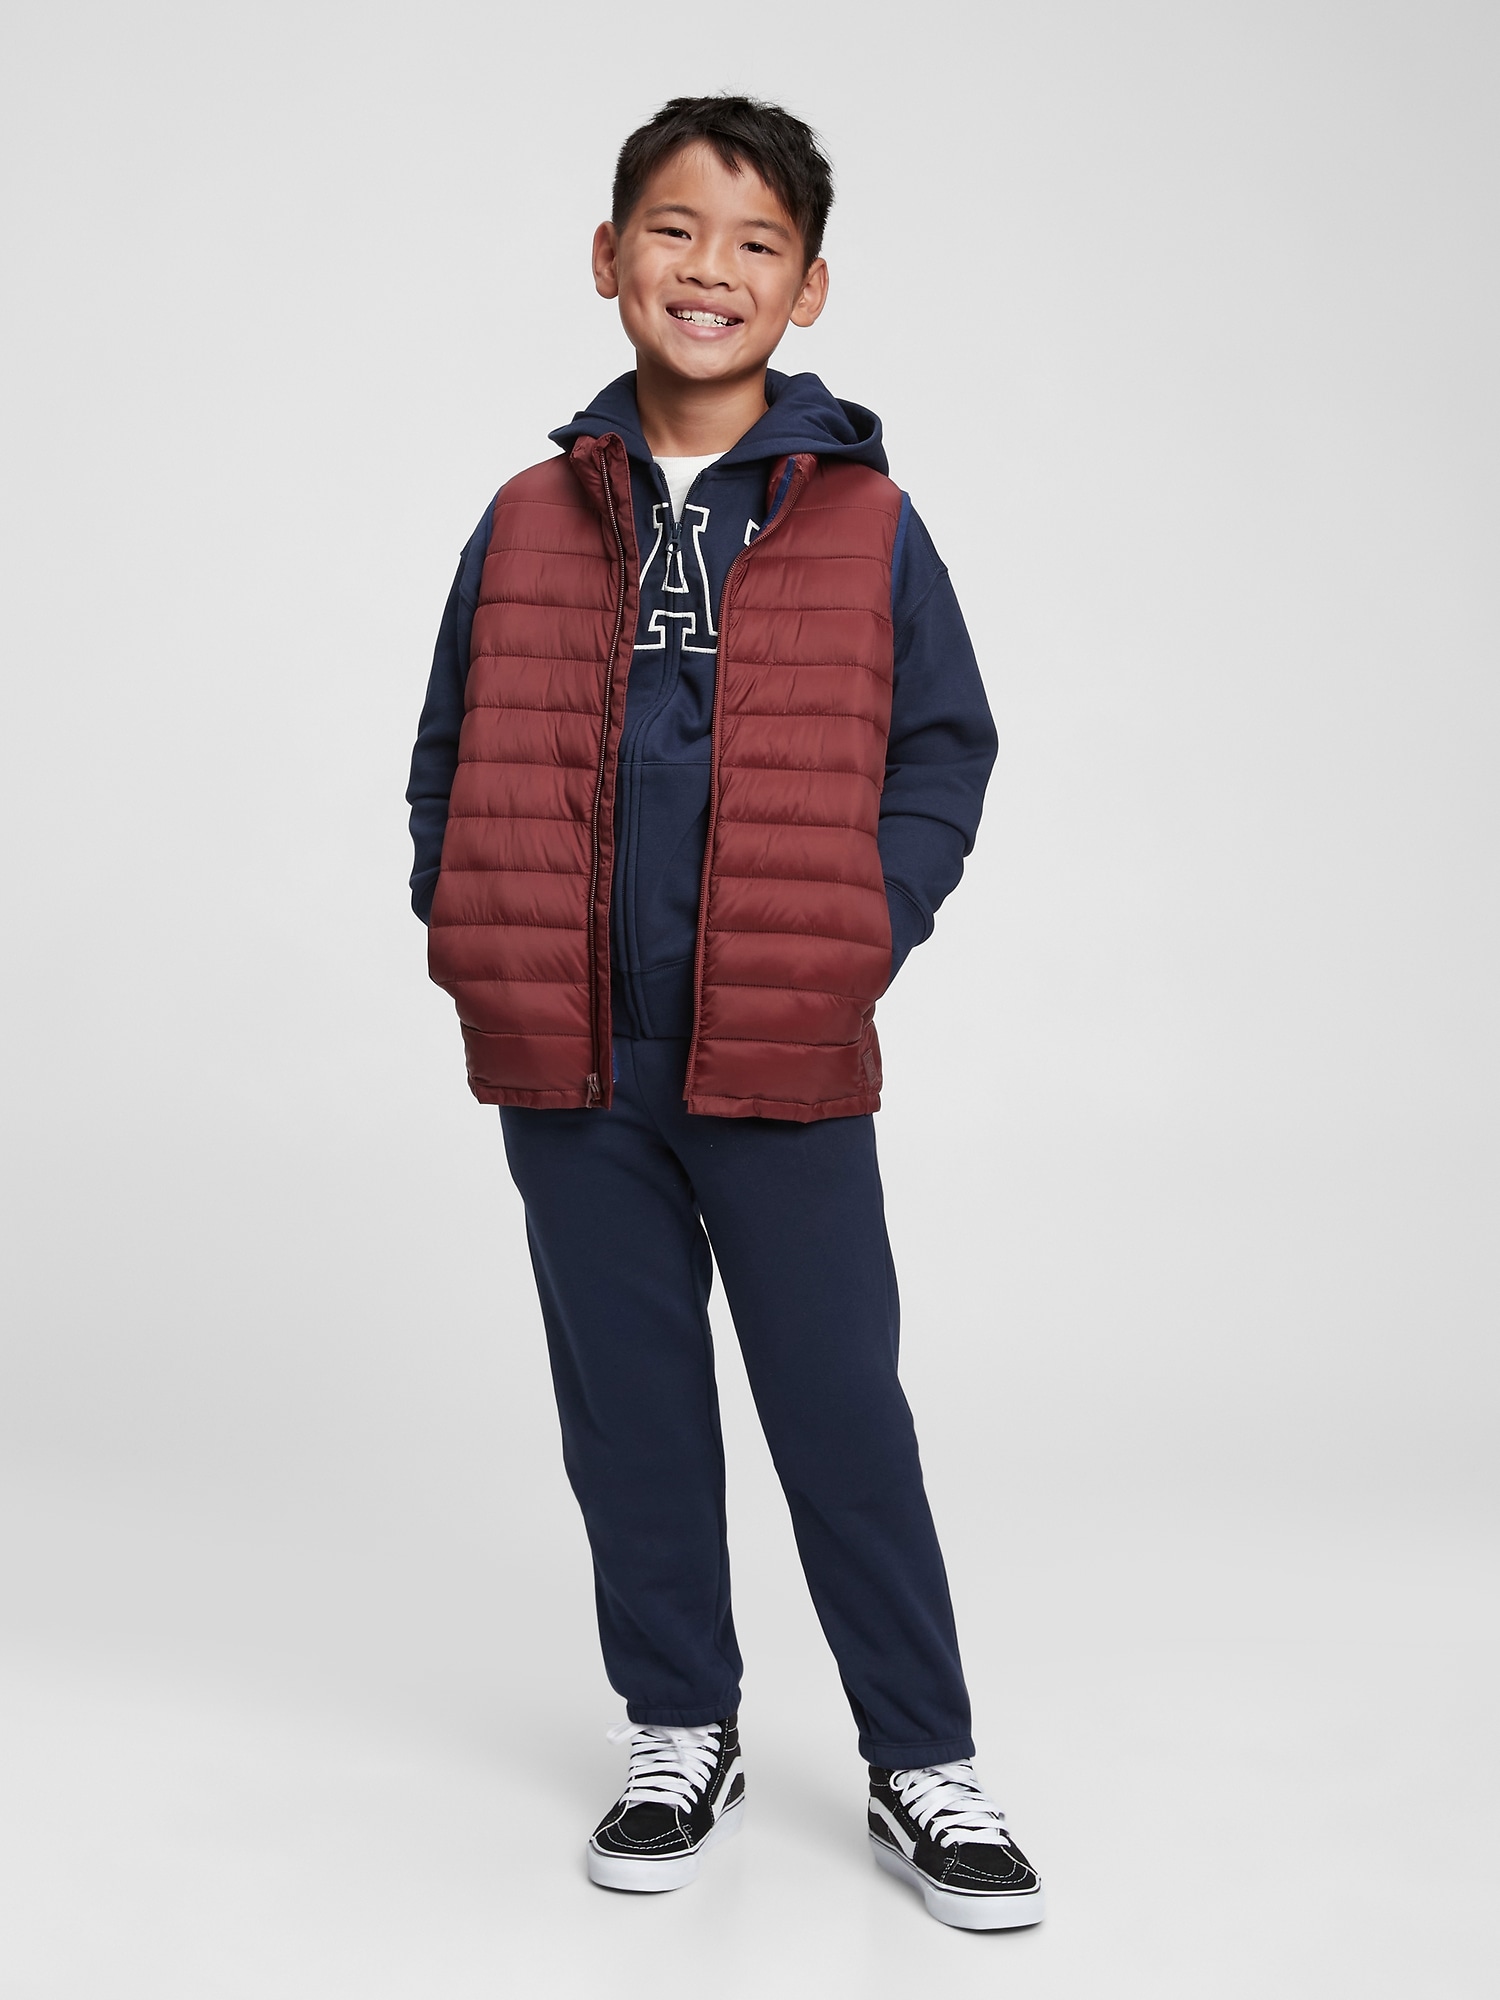 Kids 100% Recycled ColdControl Puffer Vest | Gap